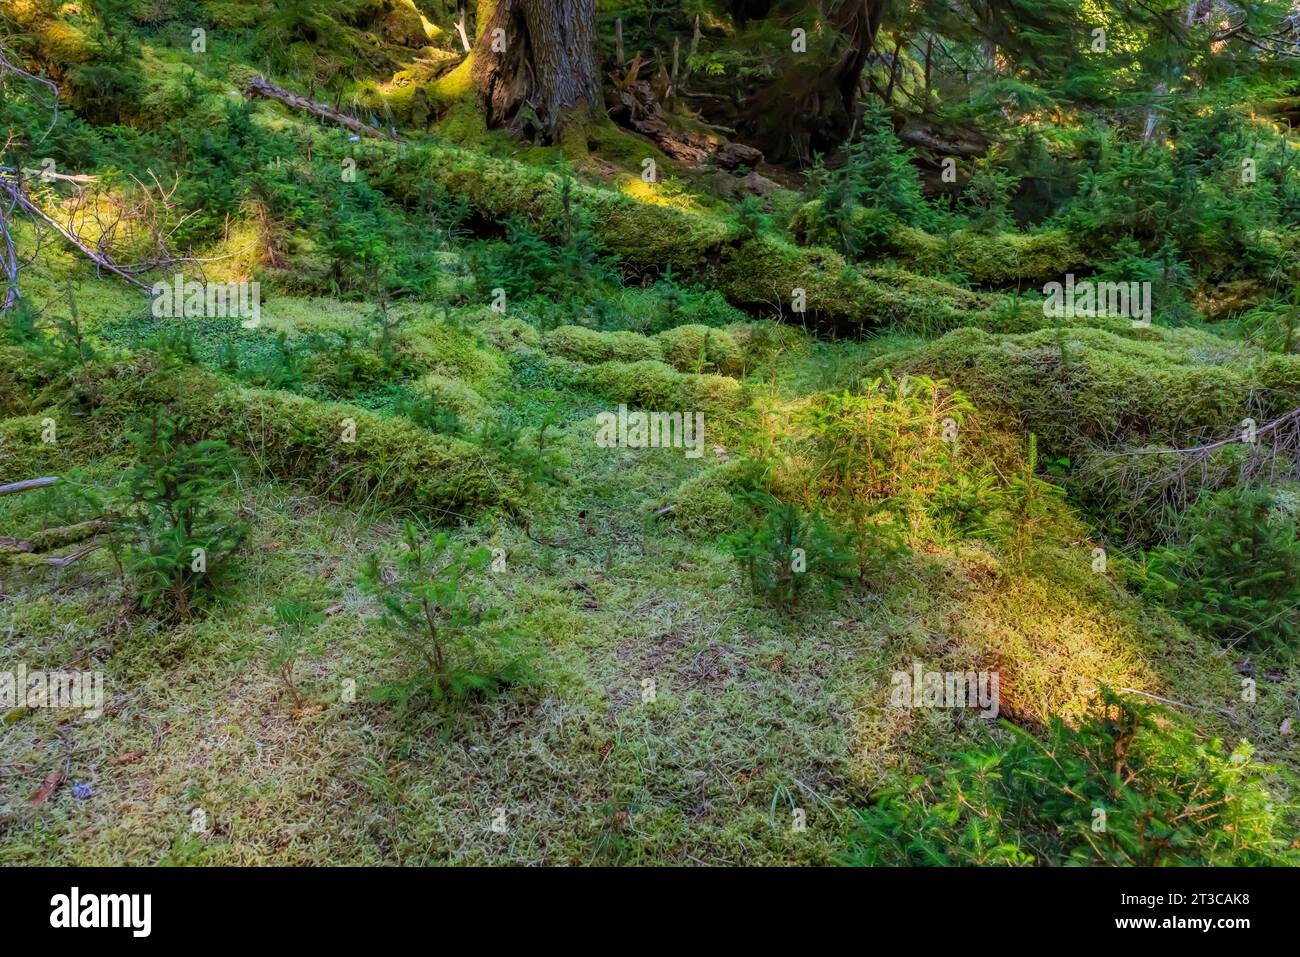 Sitka Spruce, Picea stichensis, heavily browsed by introduced deer in the rainforest on Haida Gwaii, British Columbia, Canada Stock Photo